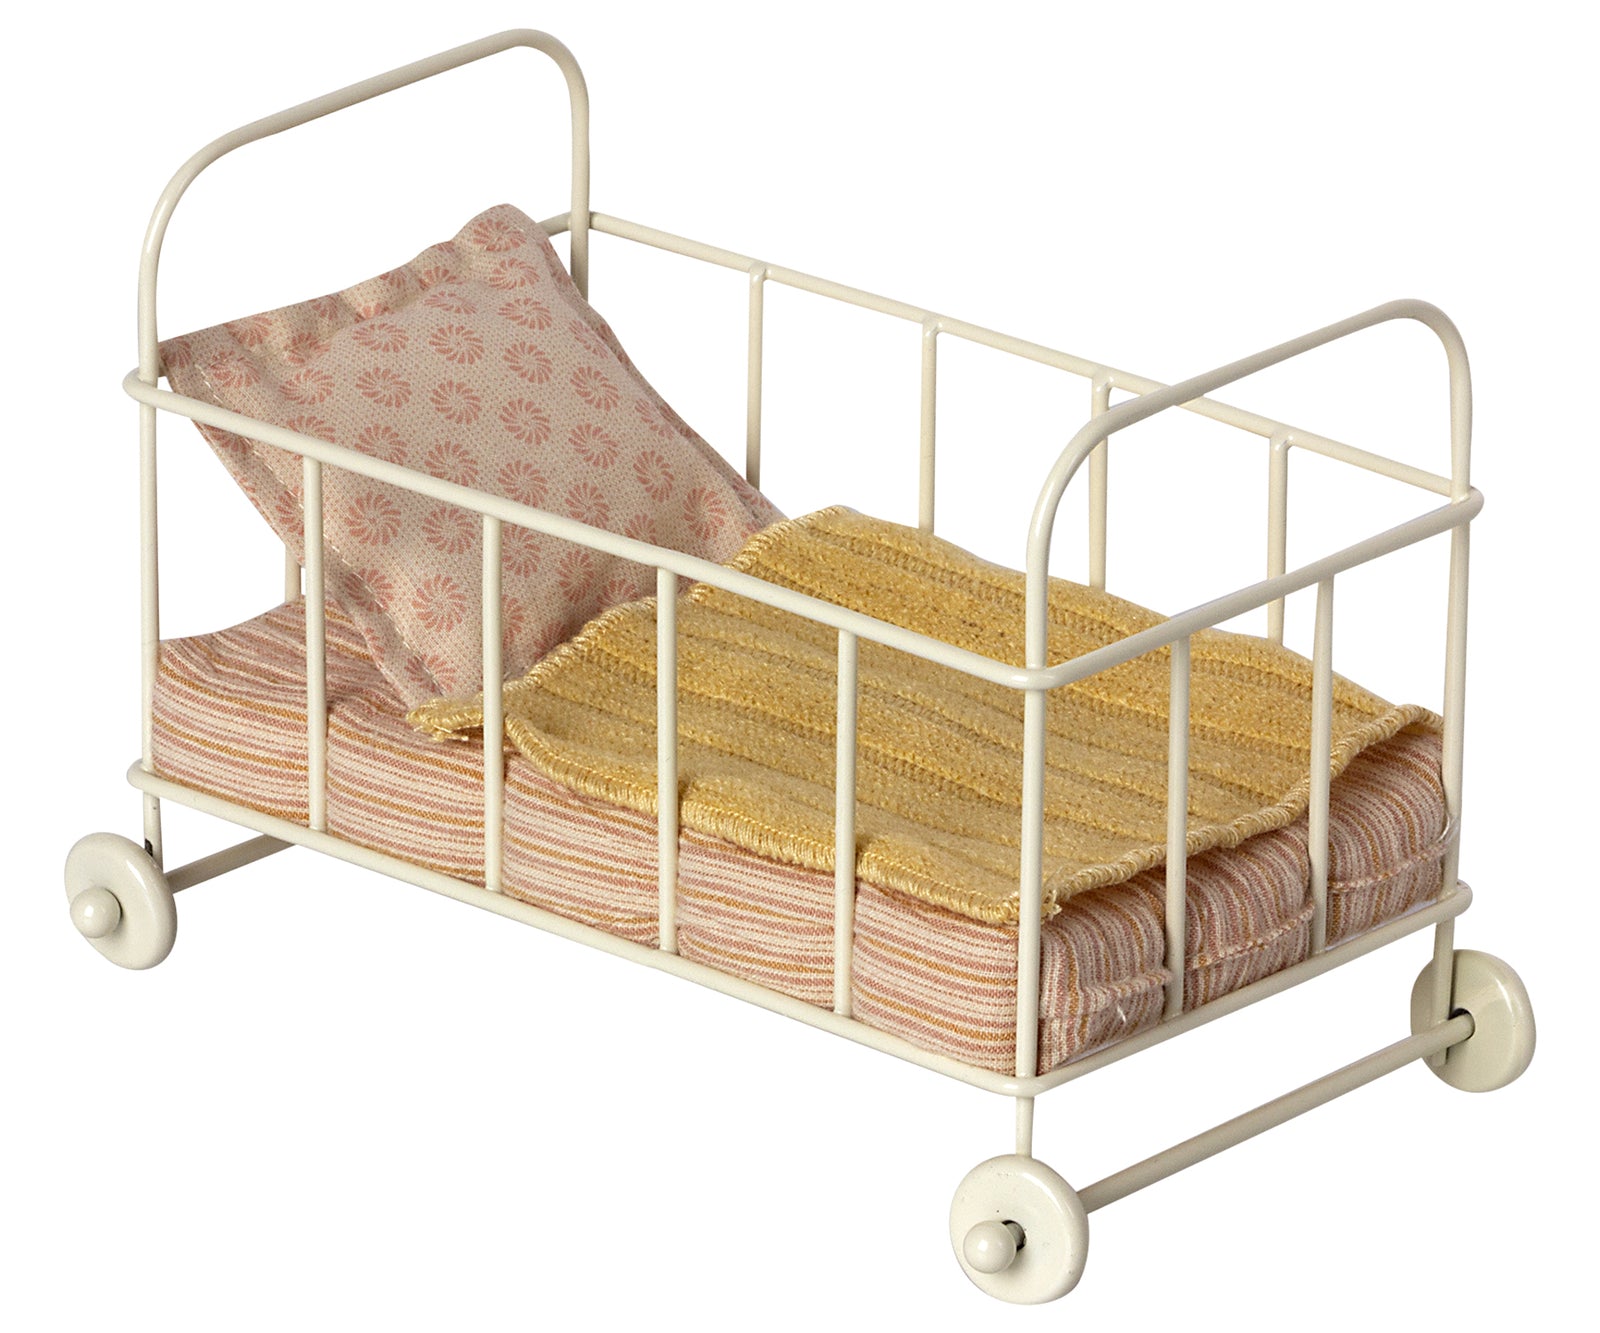 Maileg Cot Bed Micro Rose